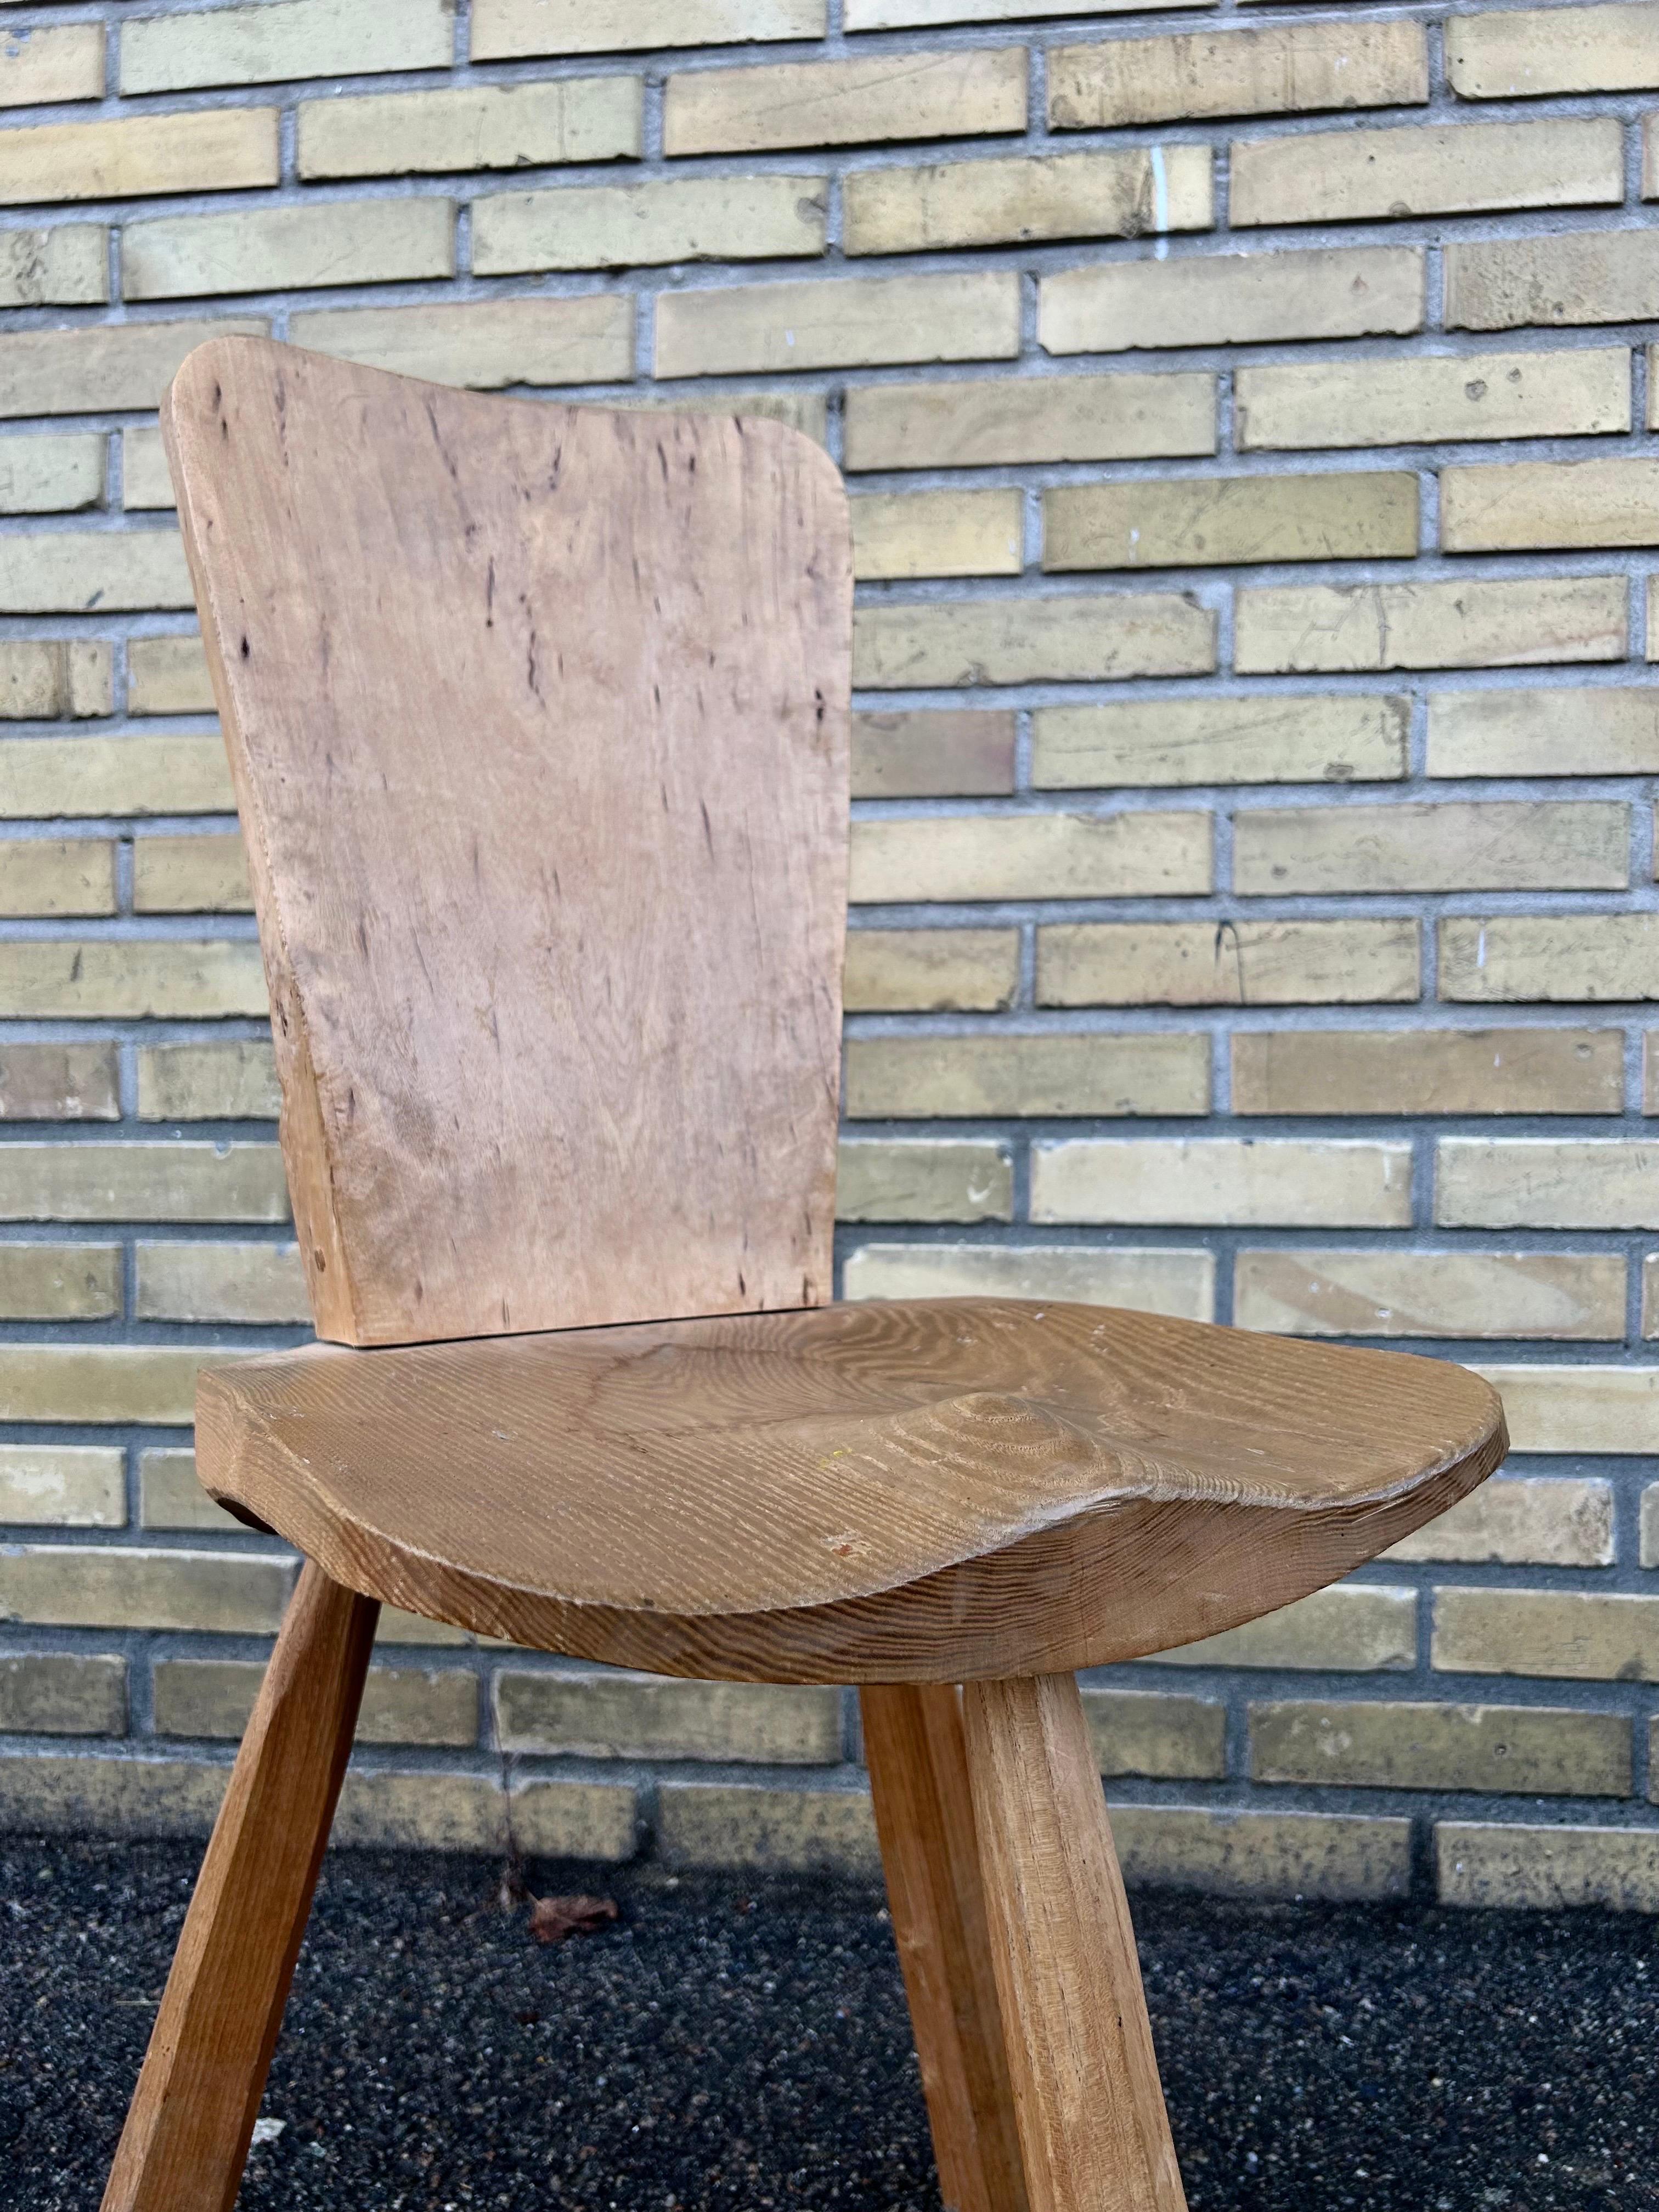 Rare brutalist wabi sabi side chair made in the mountains of France in the 1950’s in solid wood.

The chair is in good original condition with a beautiful patina.

The chair is the perfect detail for any style of interior from the traditional